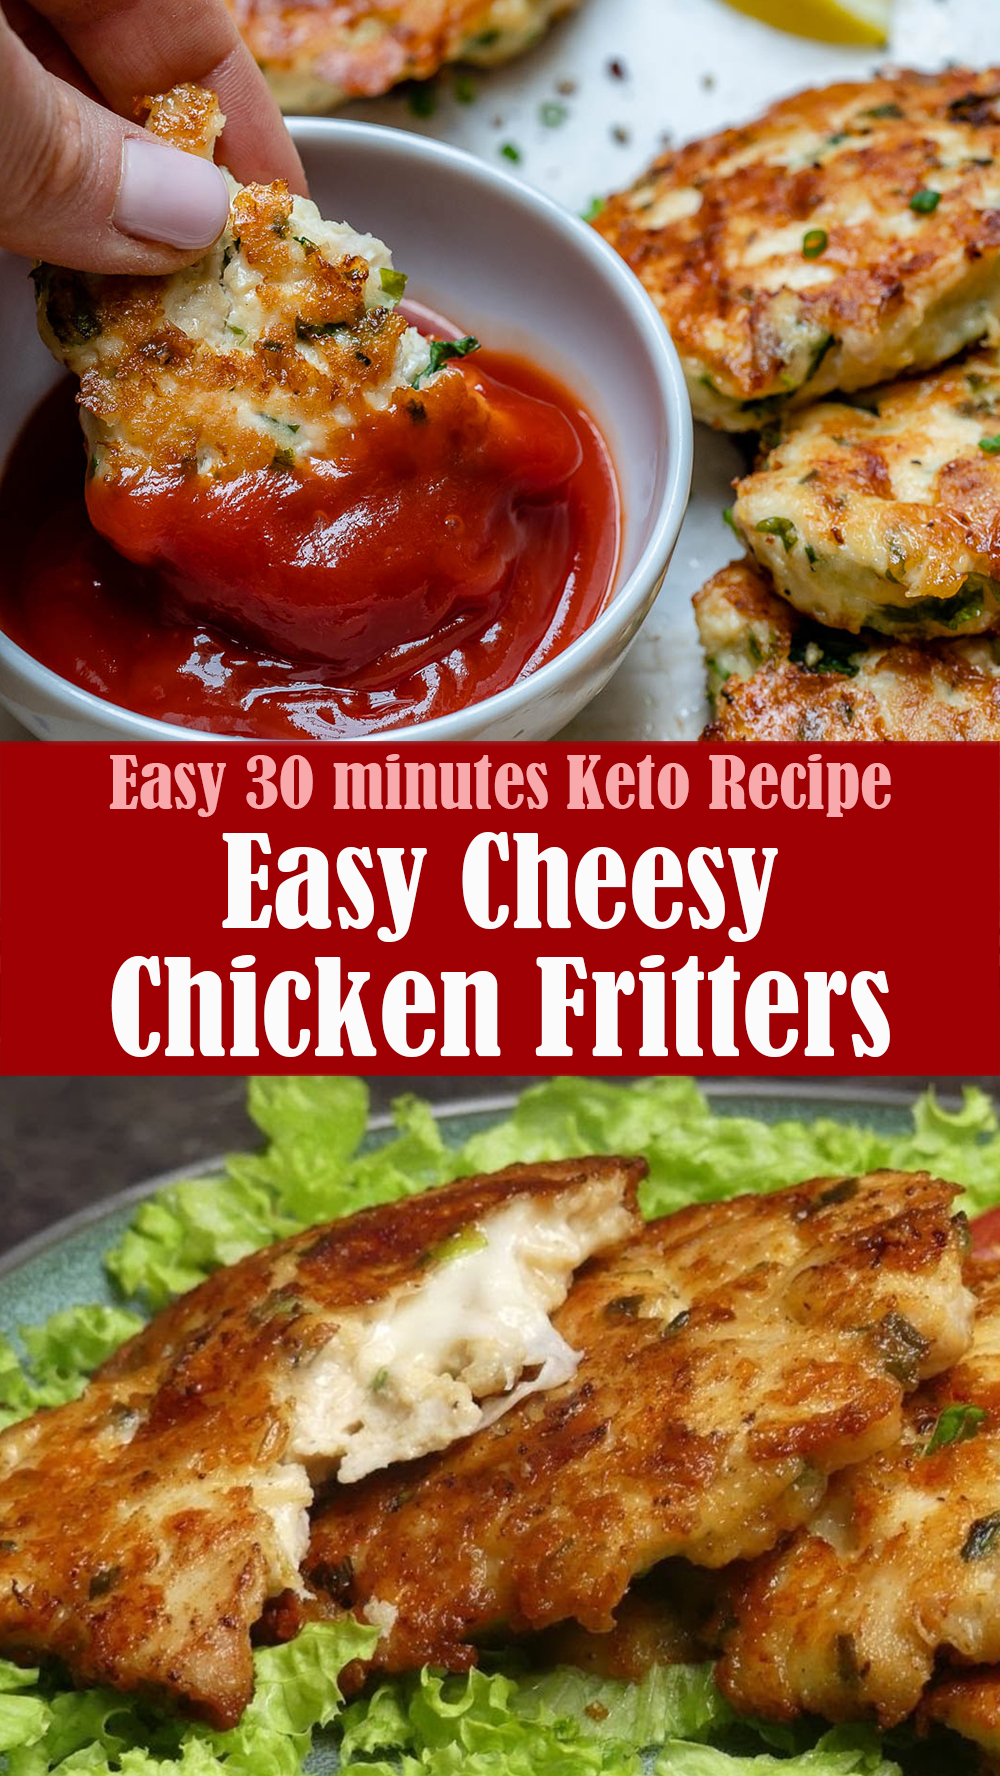 Easy Cheesy Chicken Fritters